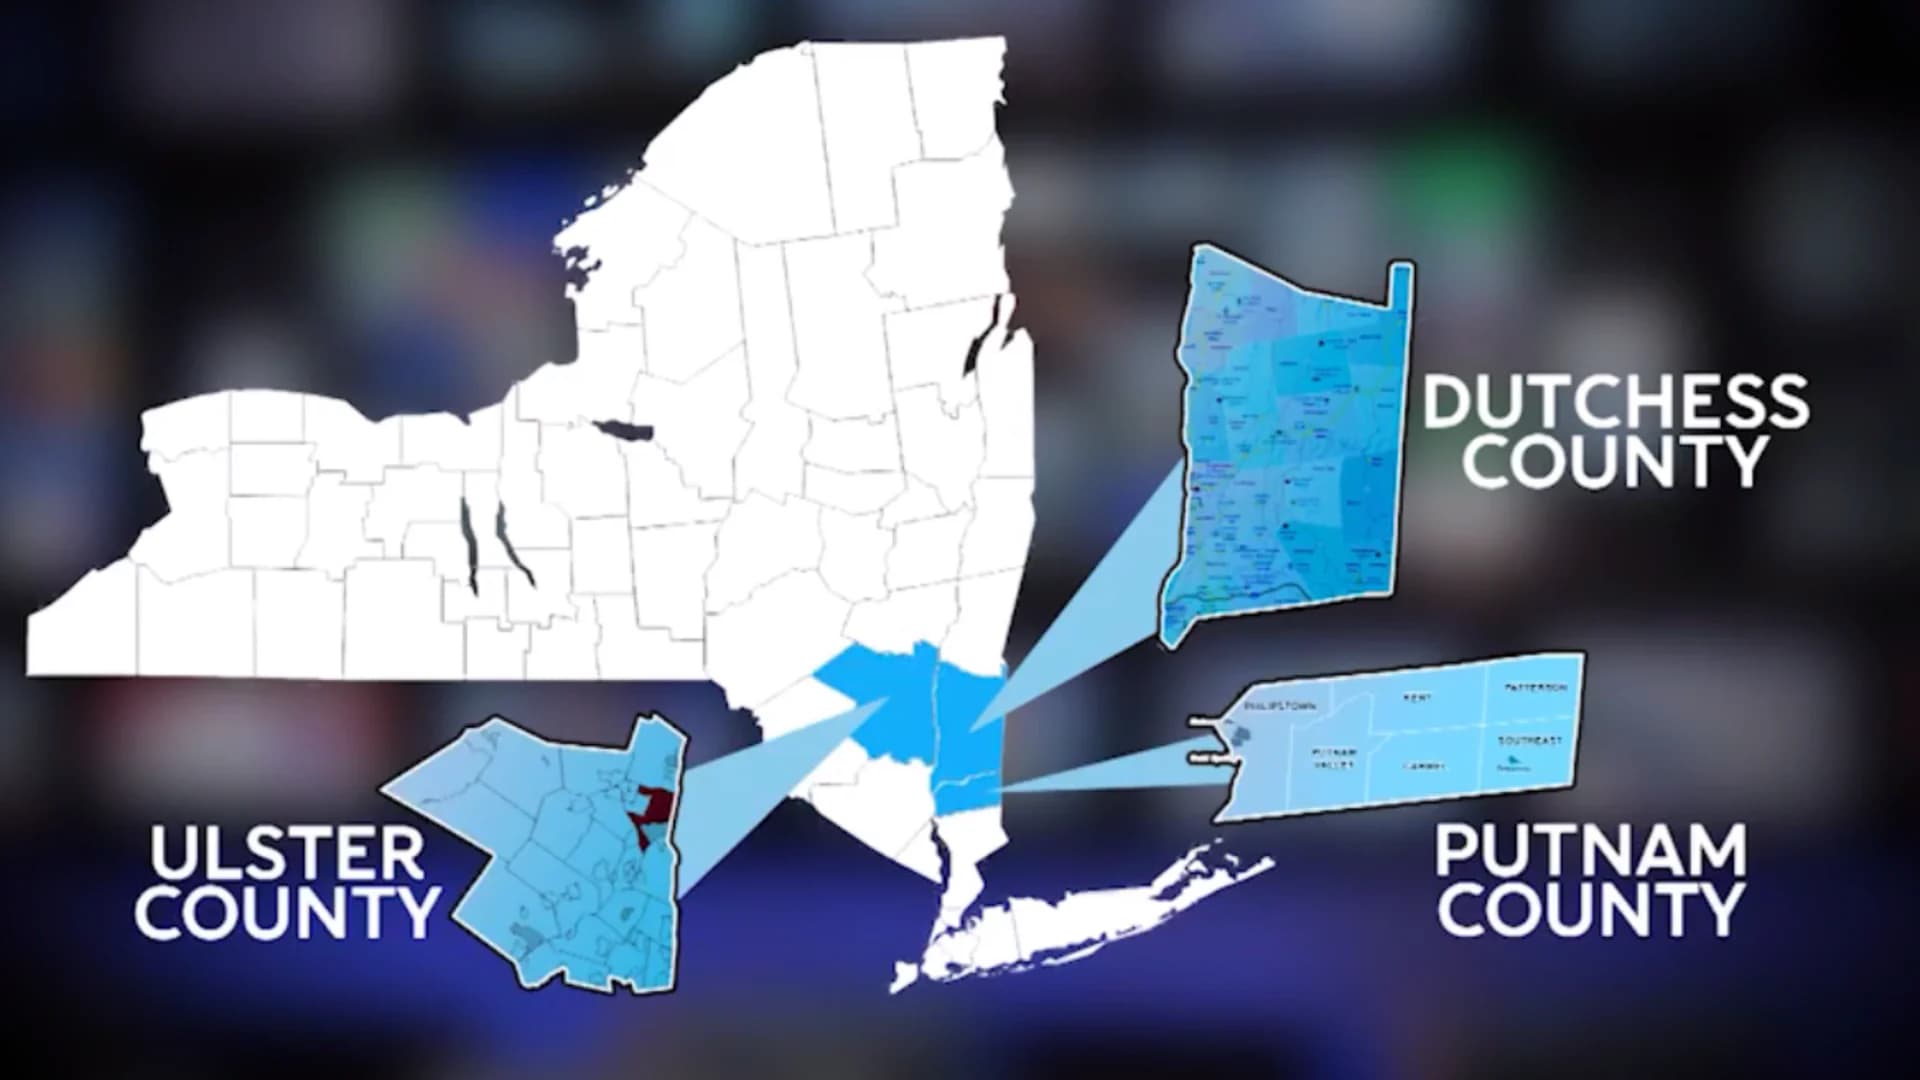 News 12 is now available in Dutchess, Ulster and Putnam counties